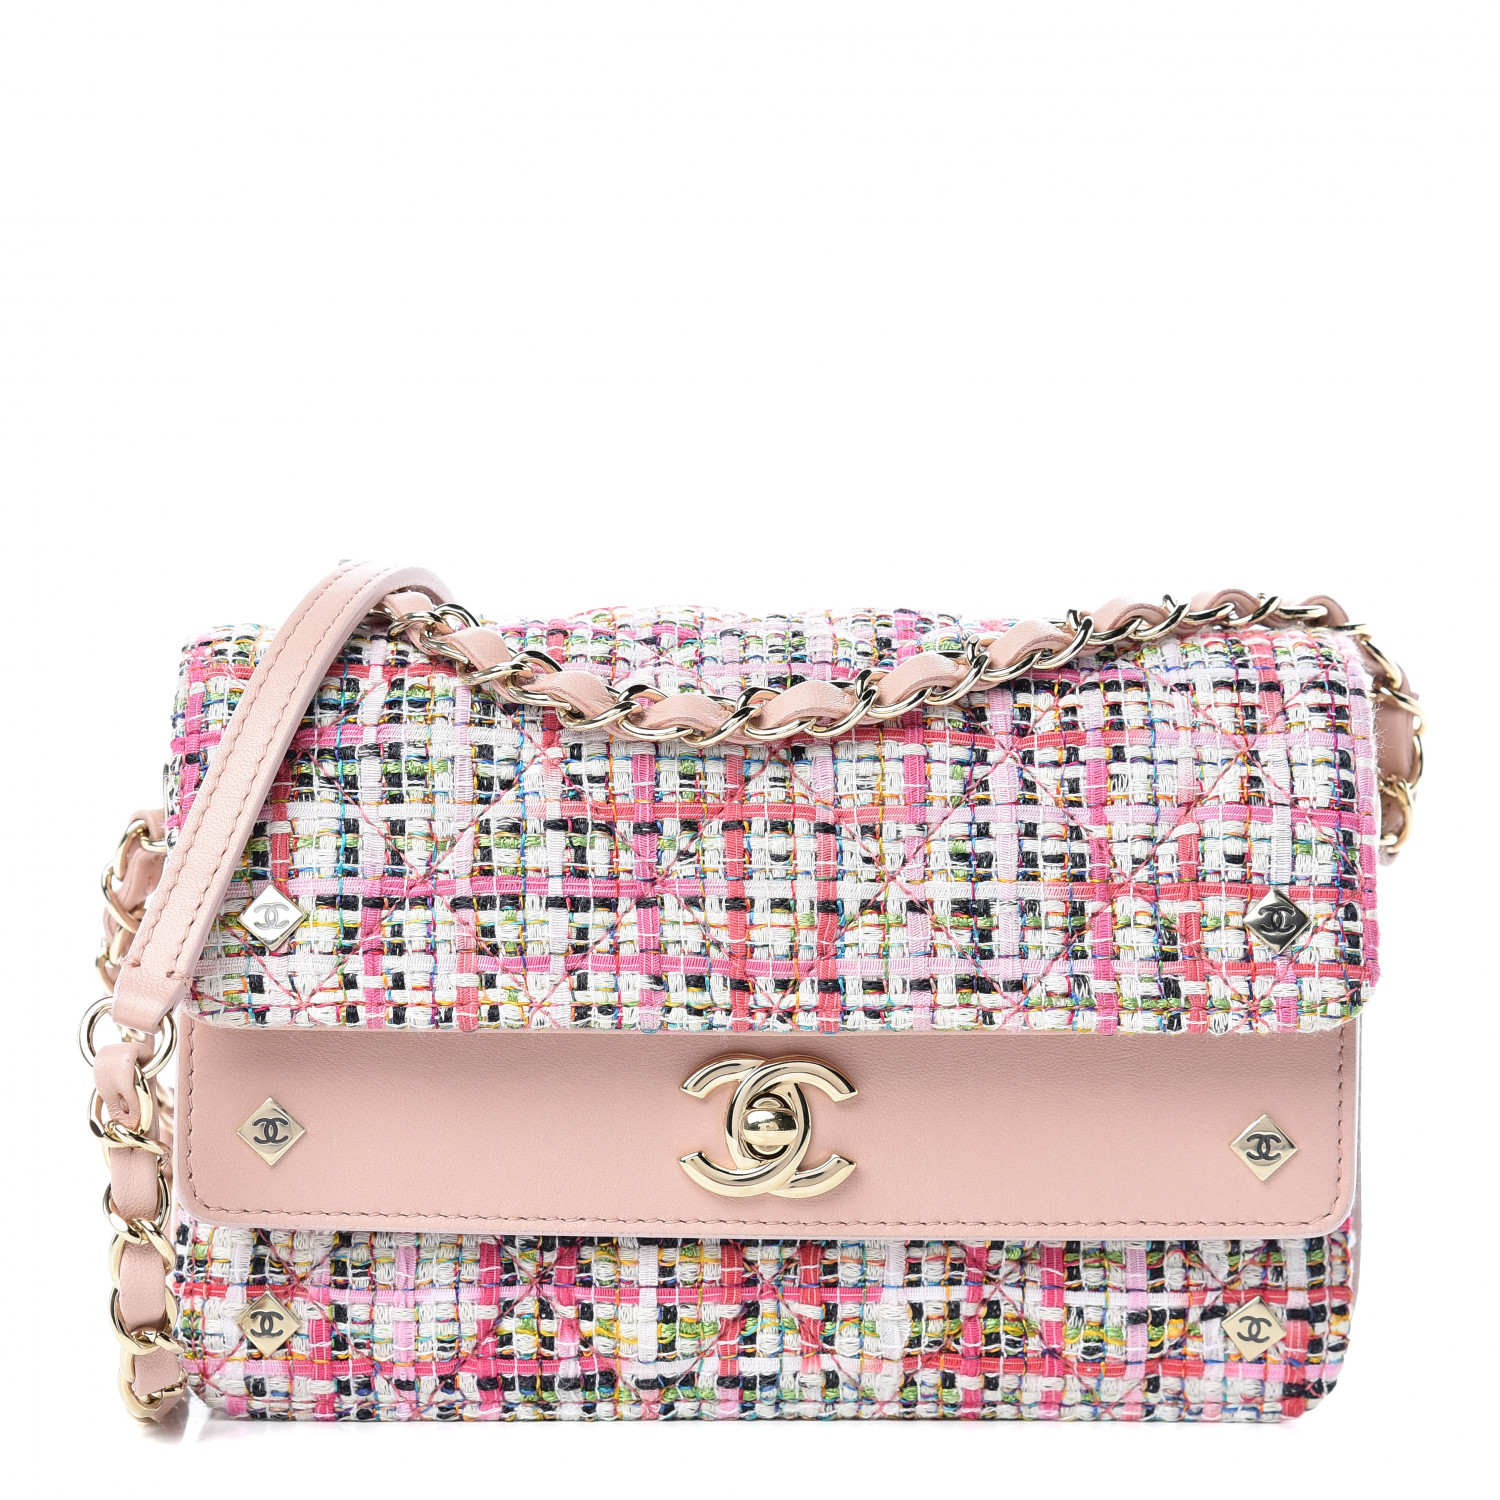 CHANEL Tweed Calfskin Quilted CC Box Flap Pink Multicolor 440613 ...